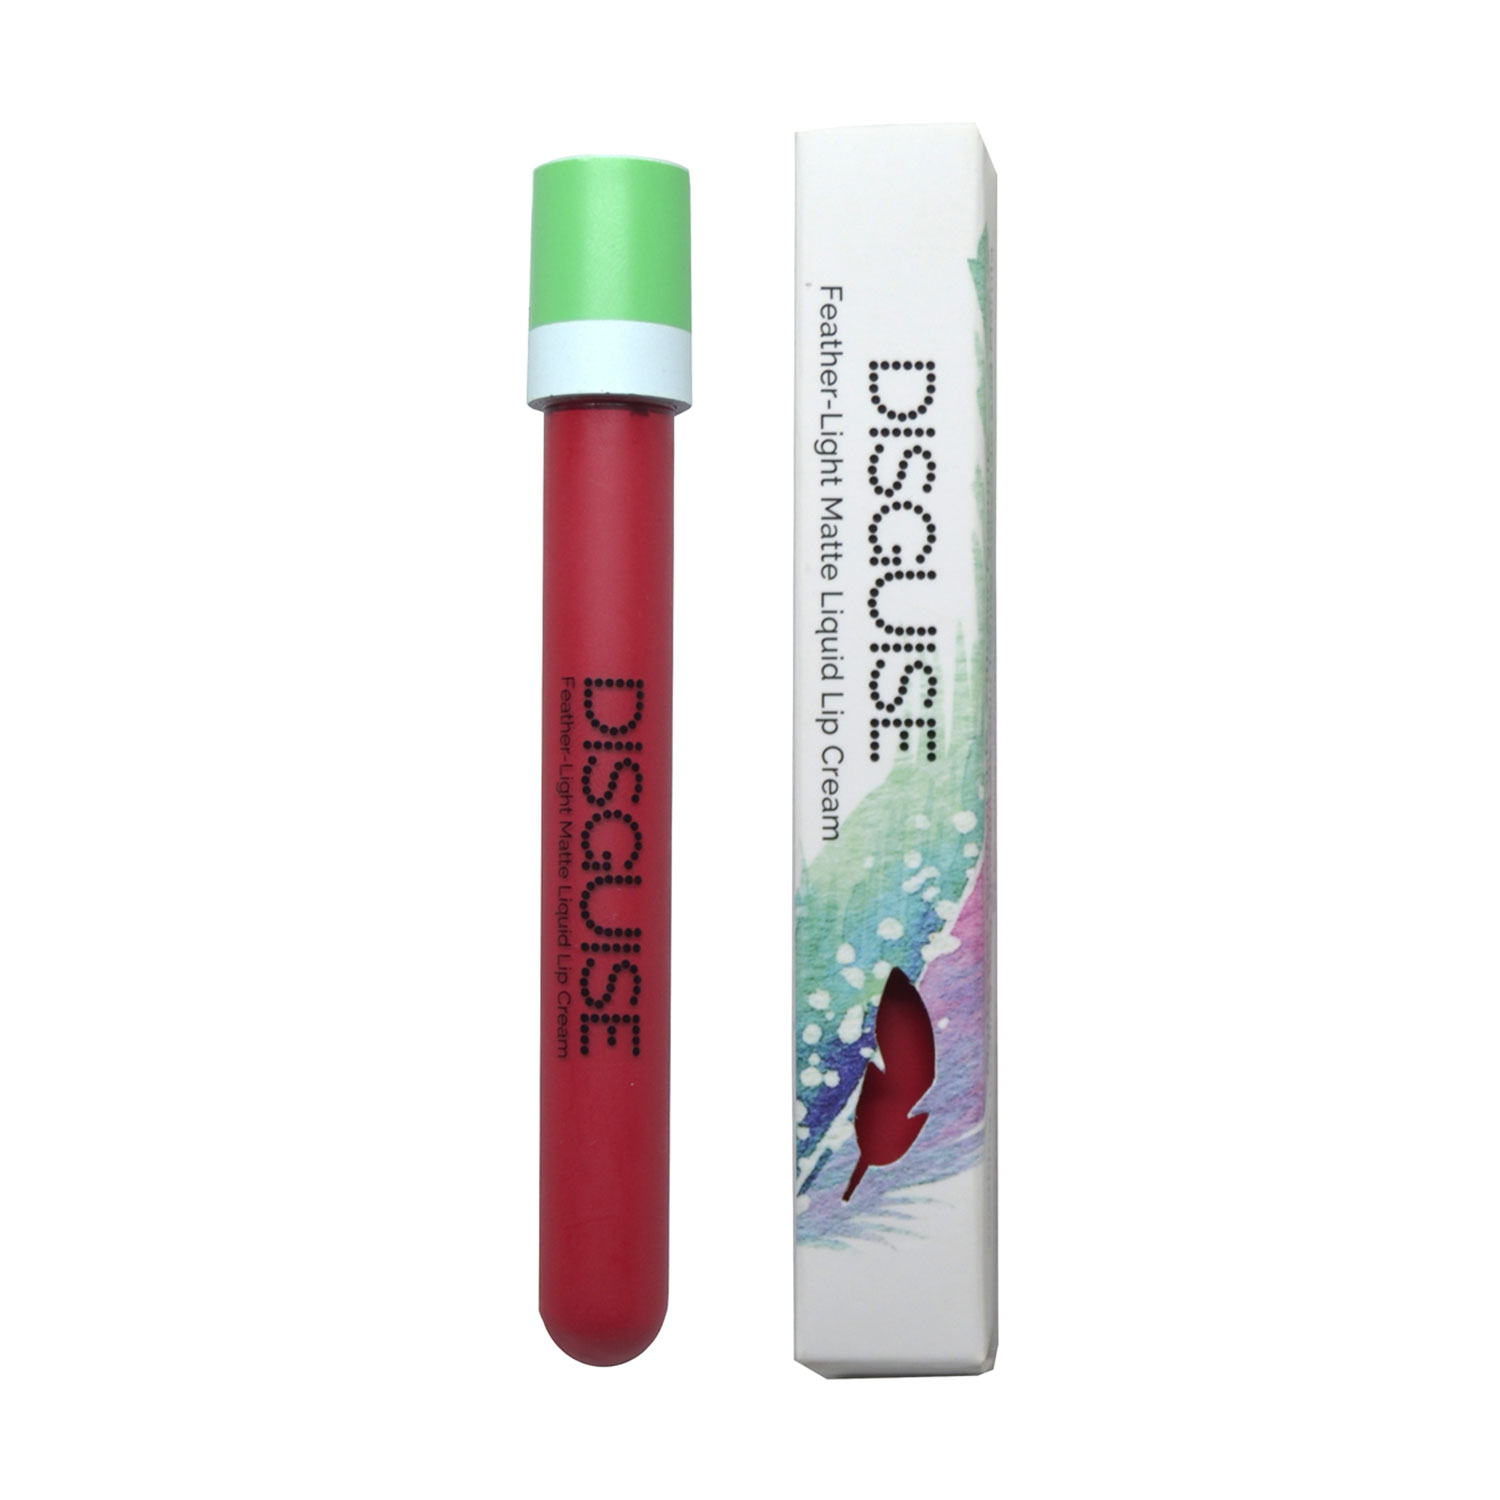 Disguise Cosmetics Feather-Light Matte Liquid Lip Cream, 6.8ml-34 Excited Coral